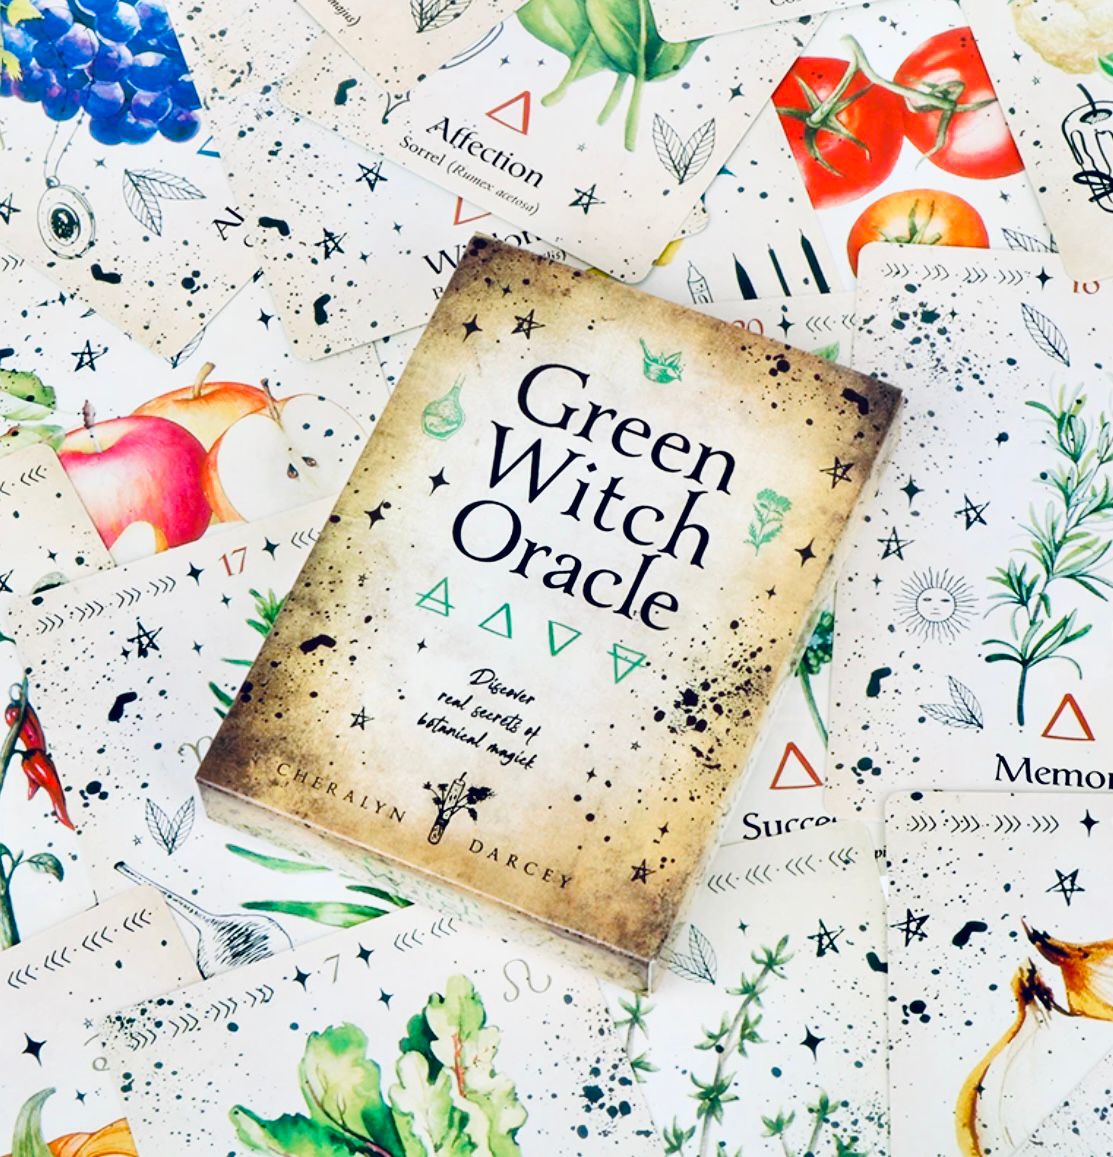 The Green Witch Oracle Cards